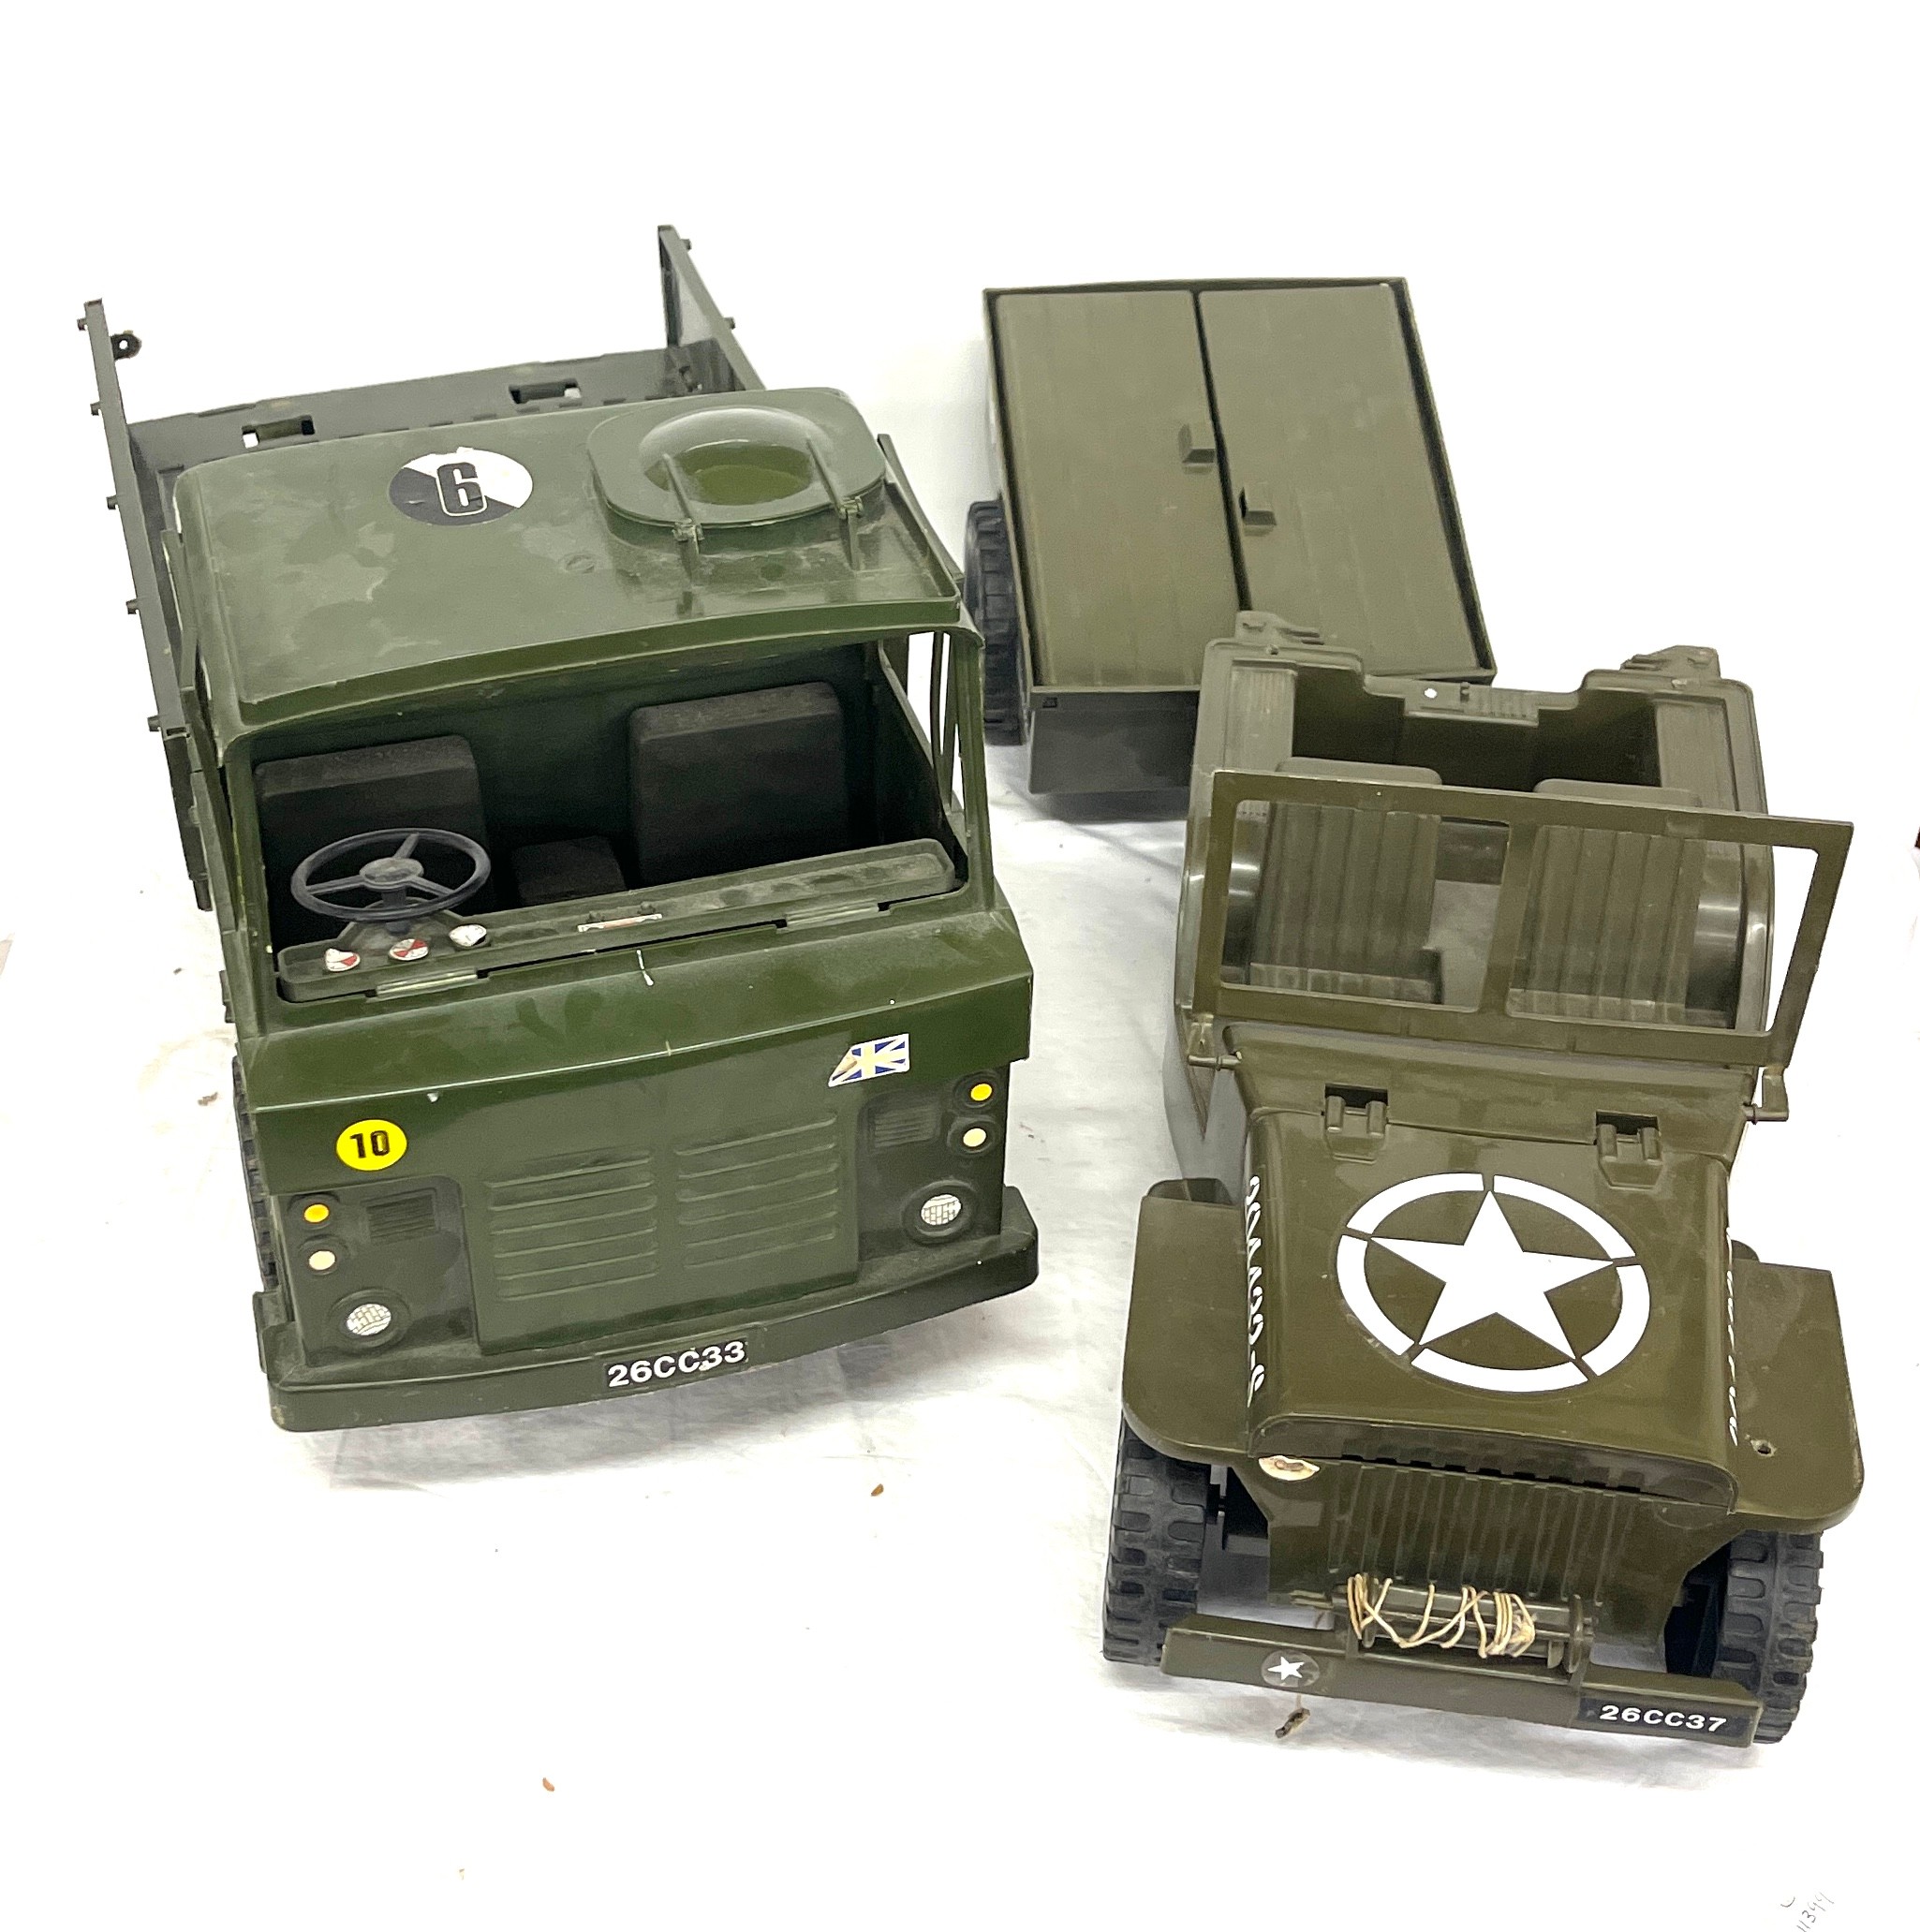 2 Vintage Army trucks, both plastic, largest truck measures approximately 56 x 28cm